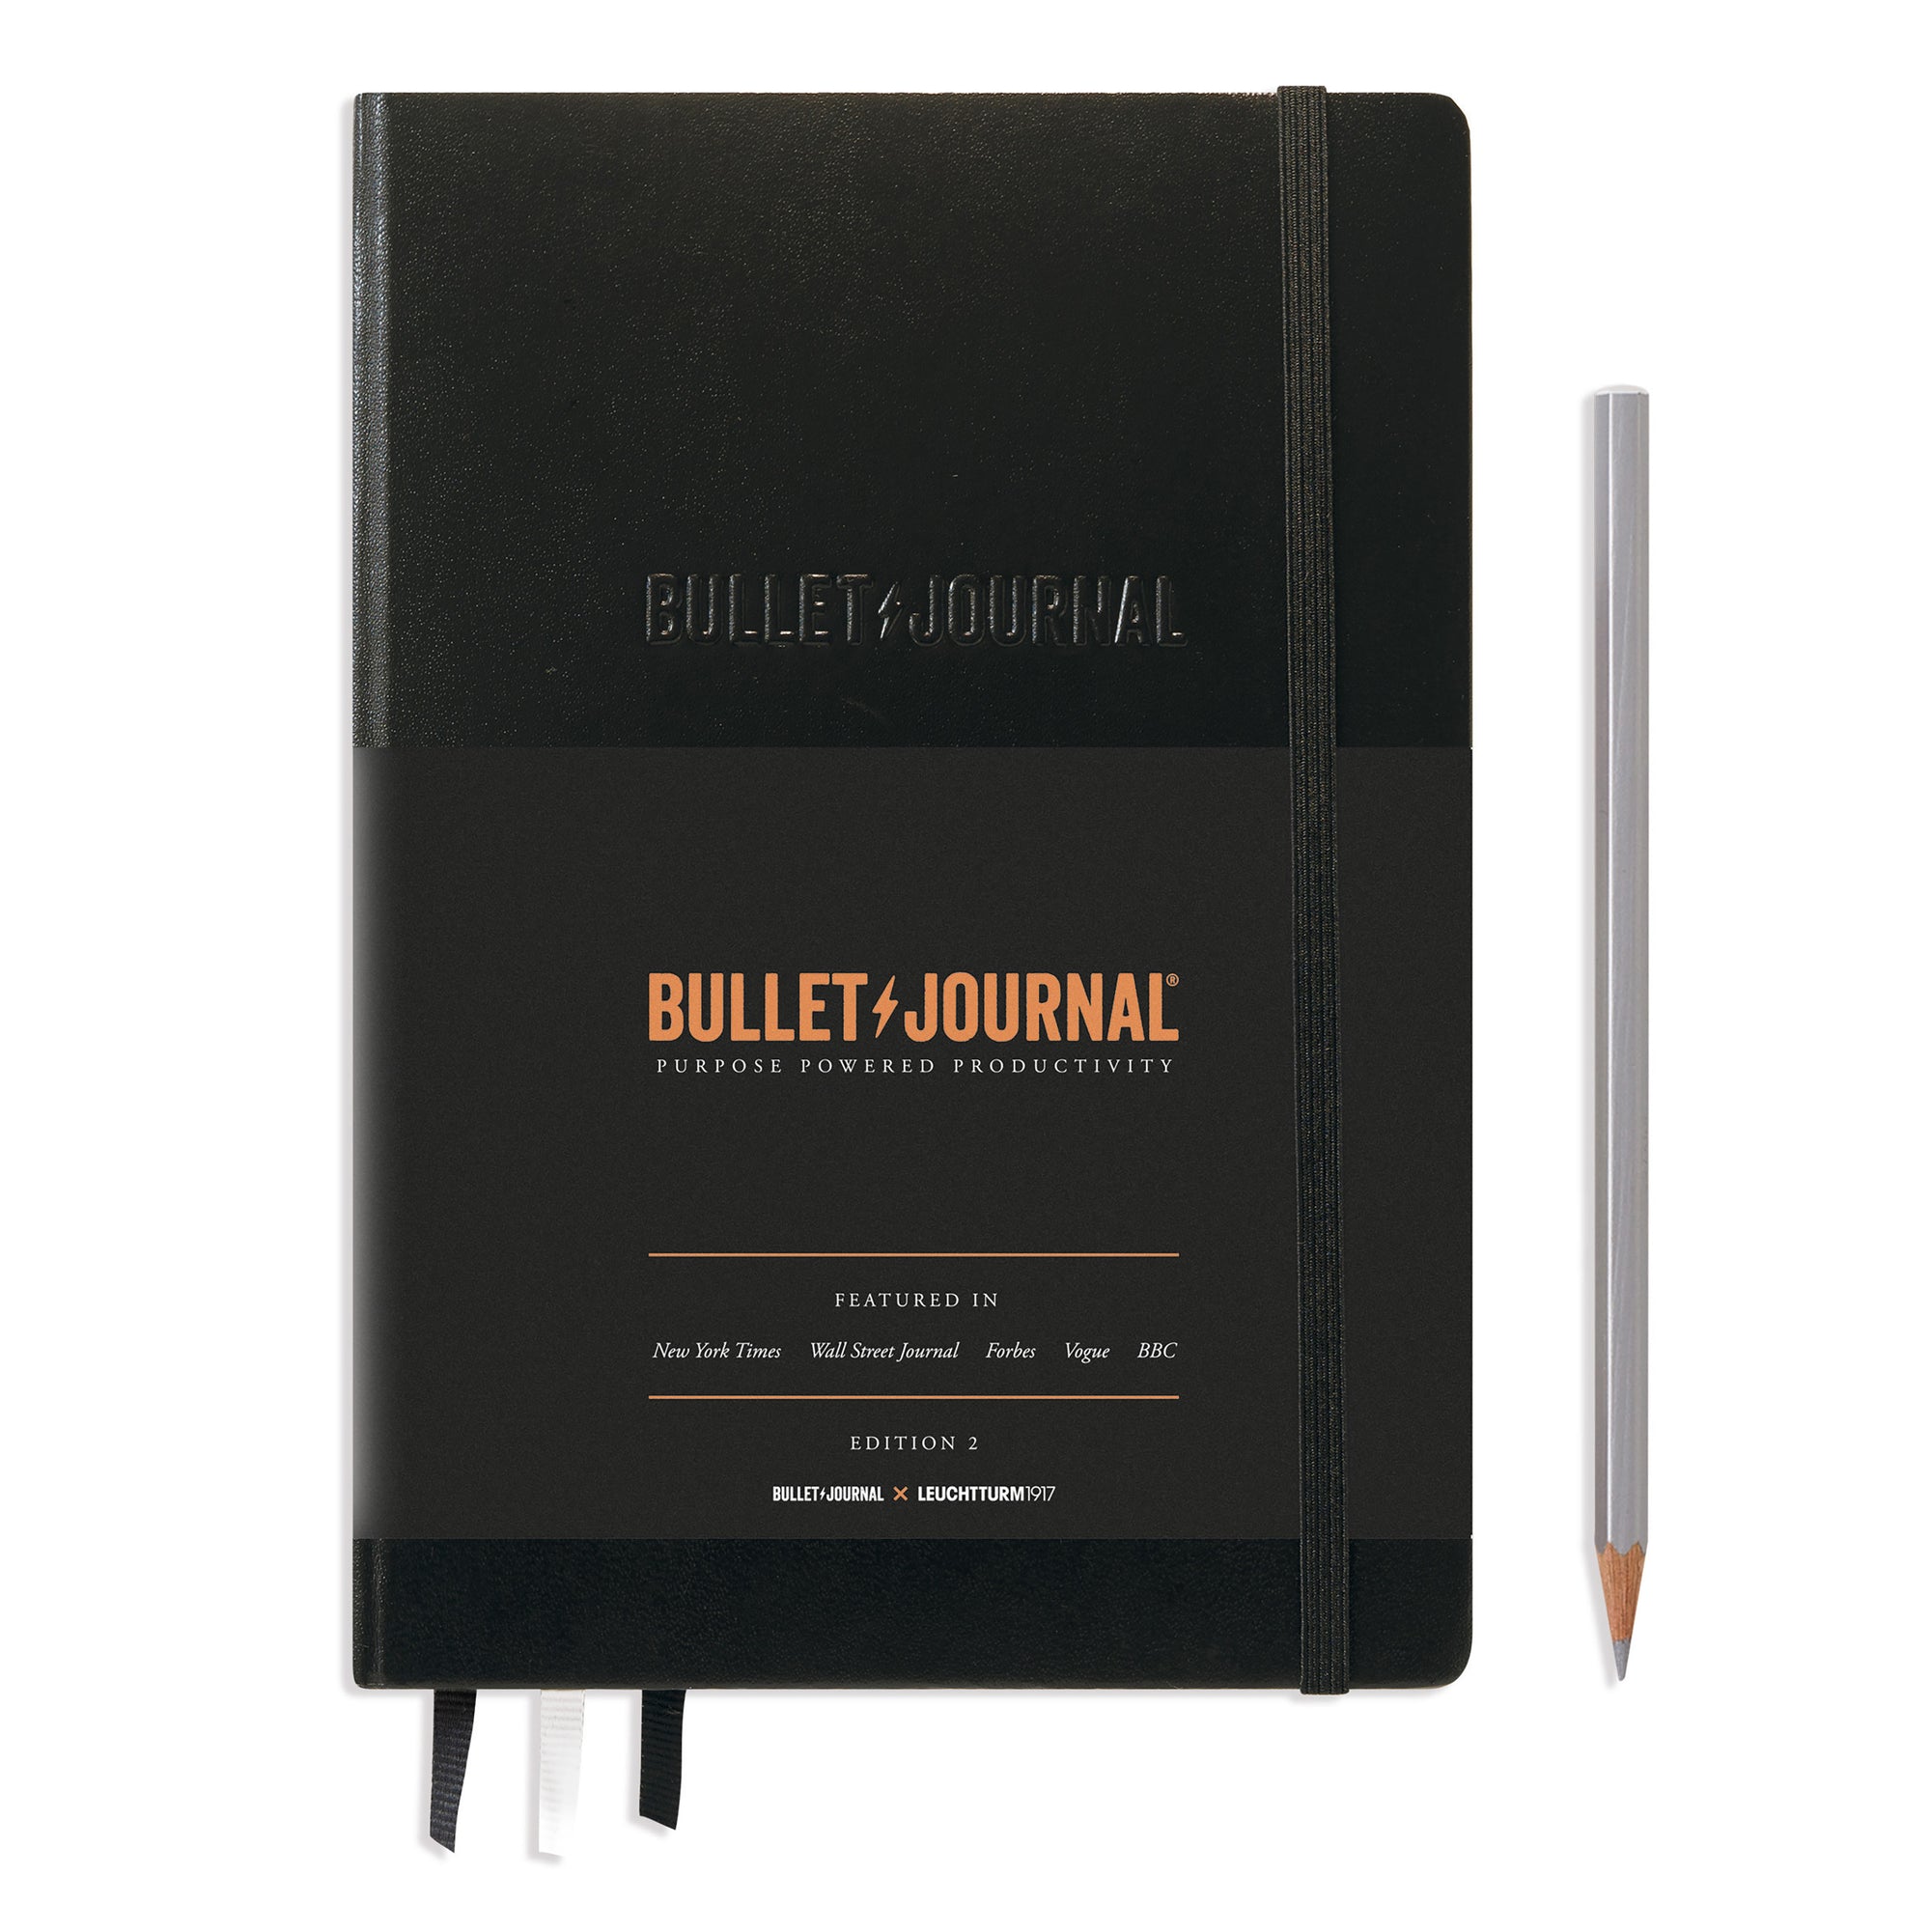 A black bullet journal notebook. It has an elastic band keeping it together and a black paper band covering three quarters of the book detailing that it's a bullet journal. Embossed on the front cover are the words in capitals BULLET JOURNAL.